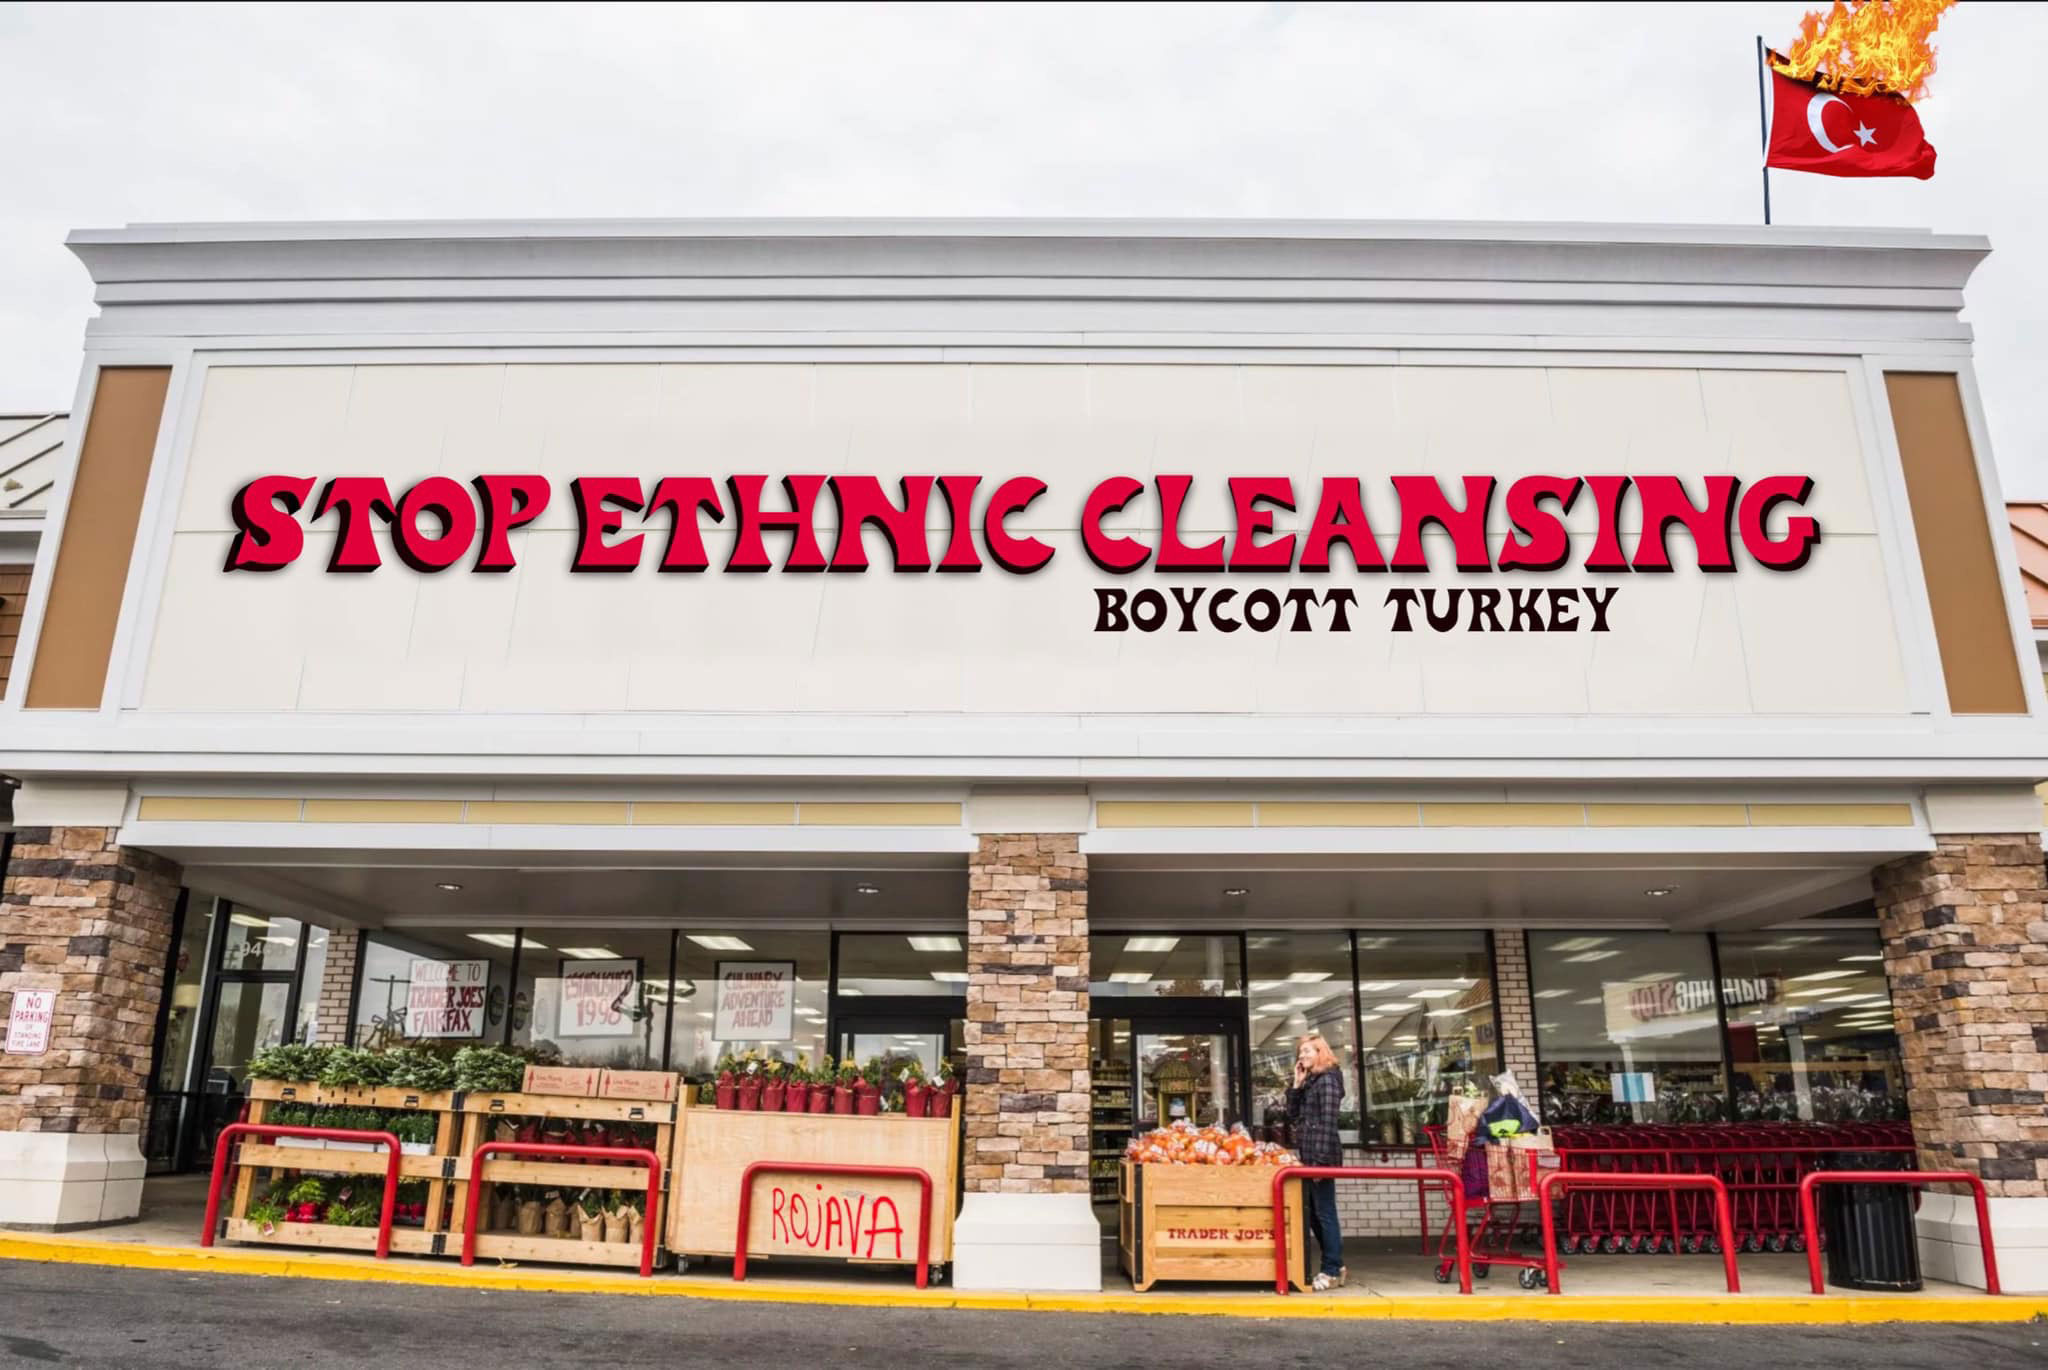 Trader Joe’s Boycott Turkey campaign graphic created by U.S.-based activists in solidarity with Rojava.